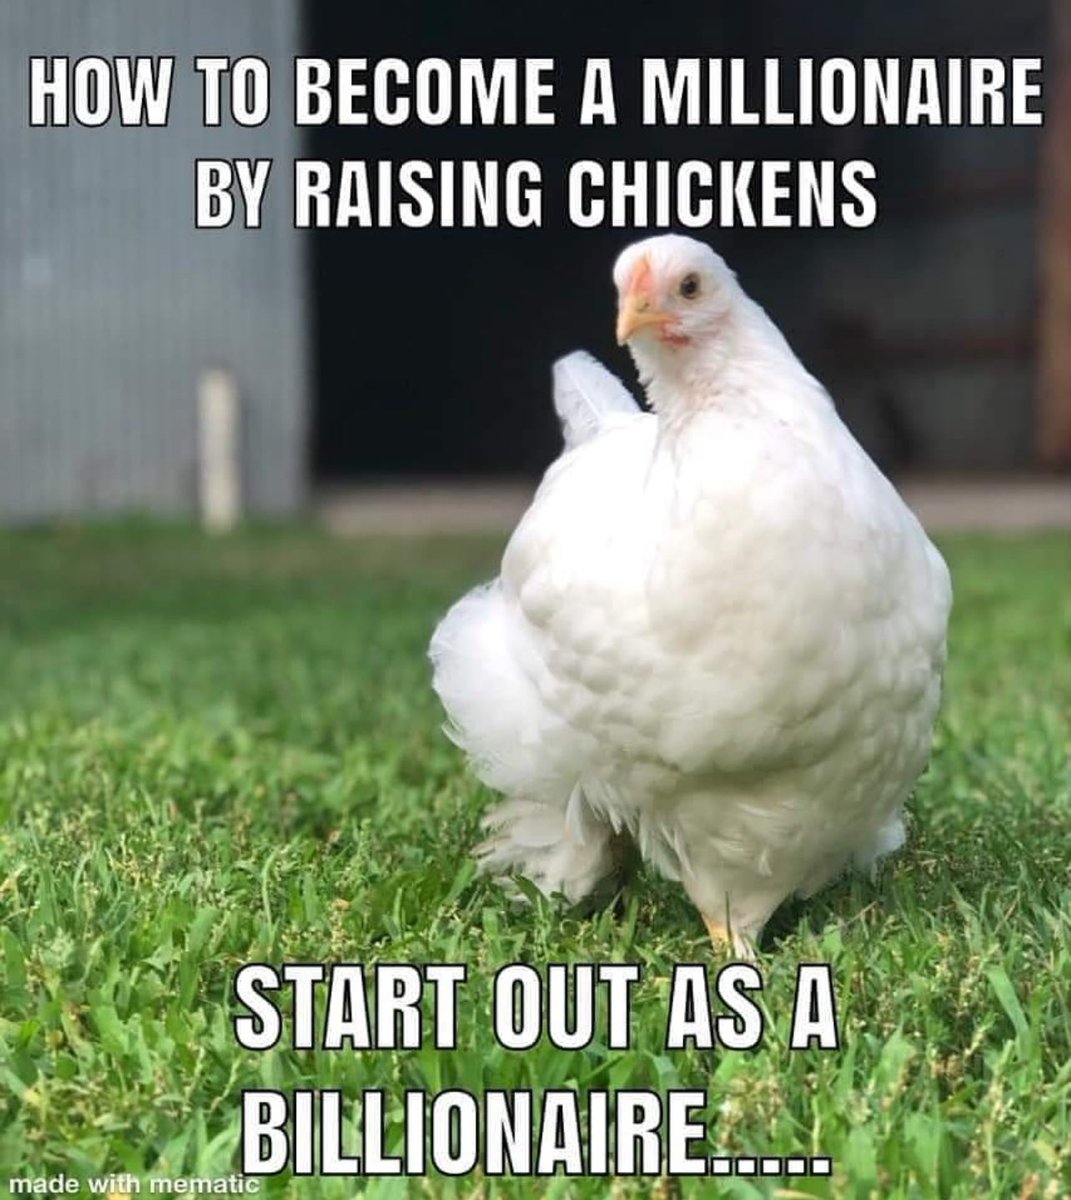 That’s all it takes!

#millionaire #billionaire #rich #finance #meme #goose #geese #flock #featheryfinetime #chicken #poultry #hens #eggs #joke #haha #farming #chickens #hilarious #lol #crazychickenlady #crazychickenman #laugh #petchickens #happyhens #animals #farmjokester